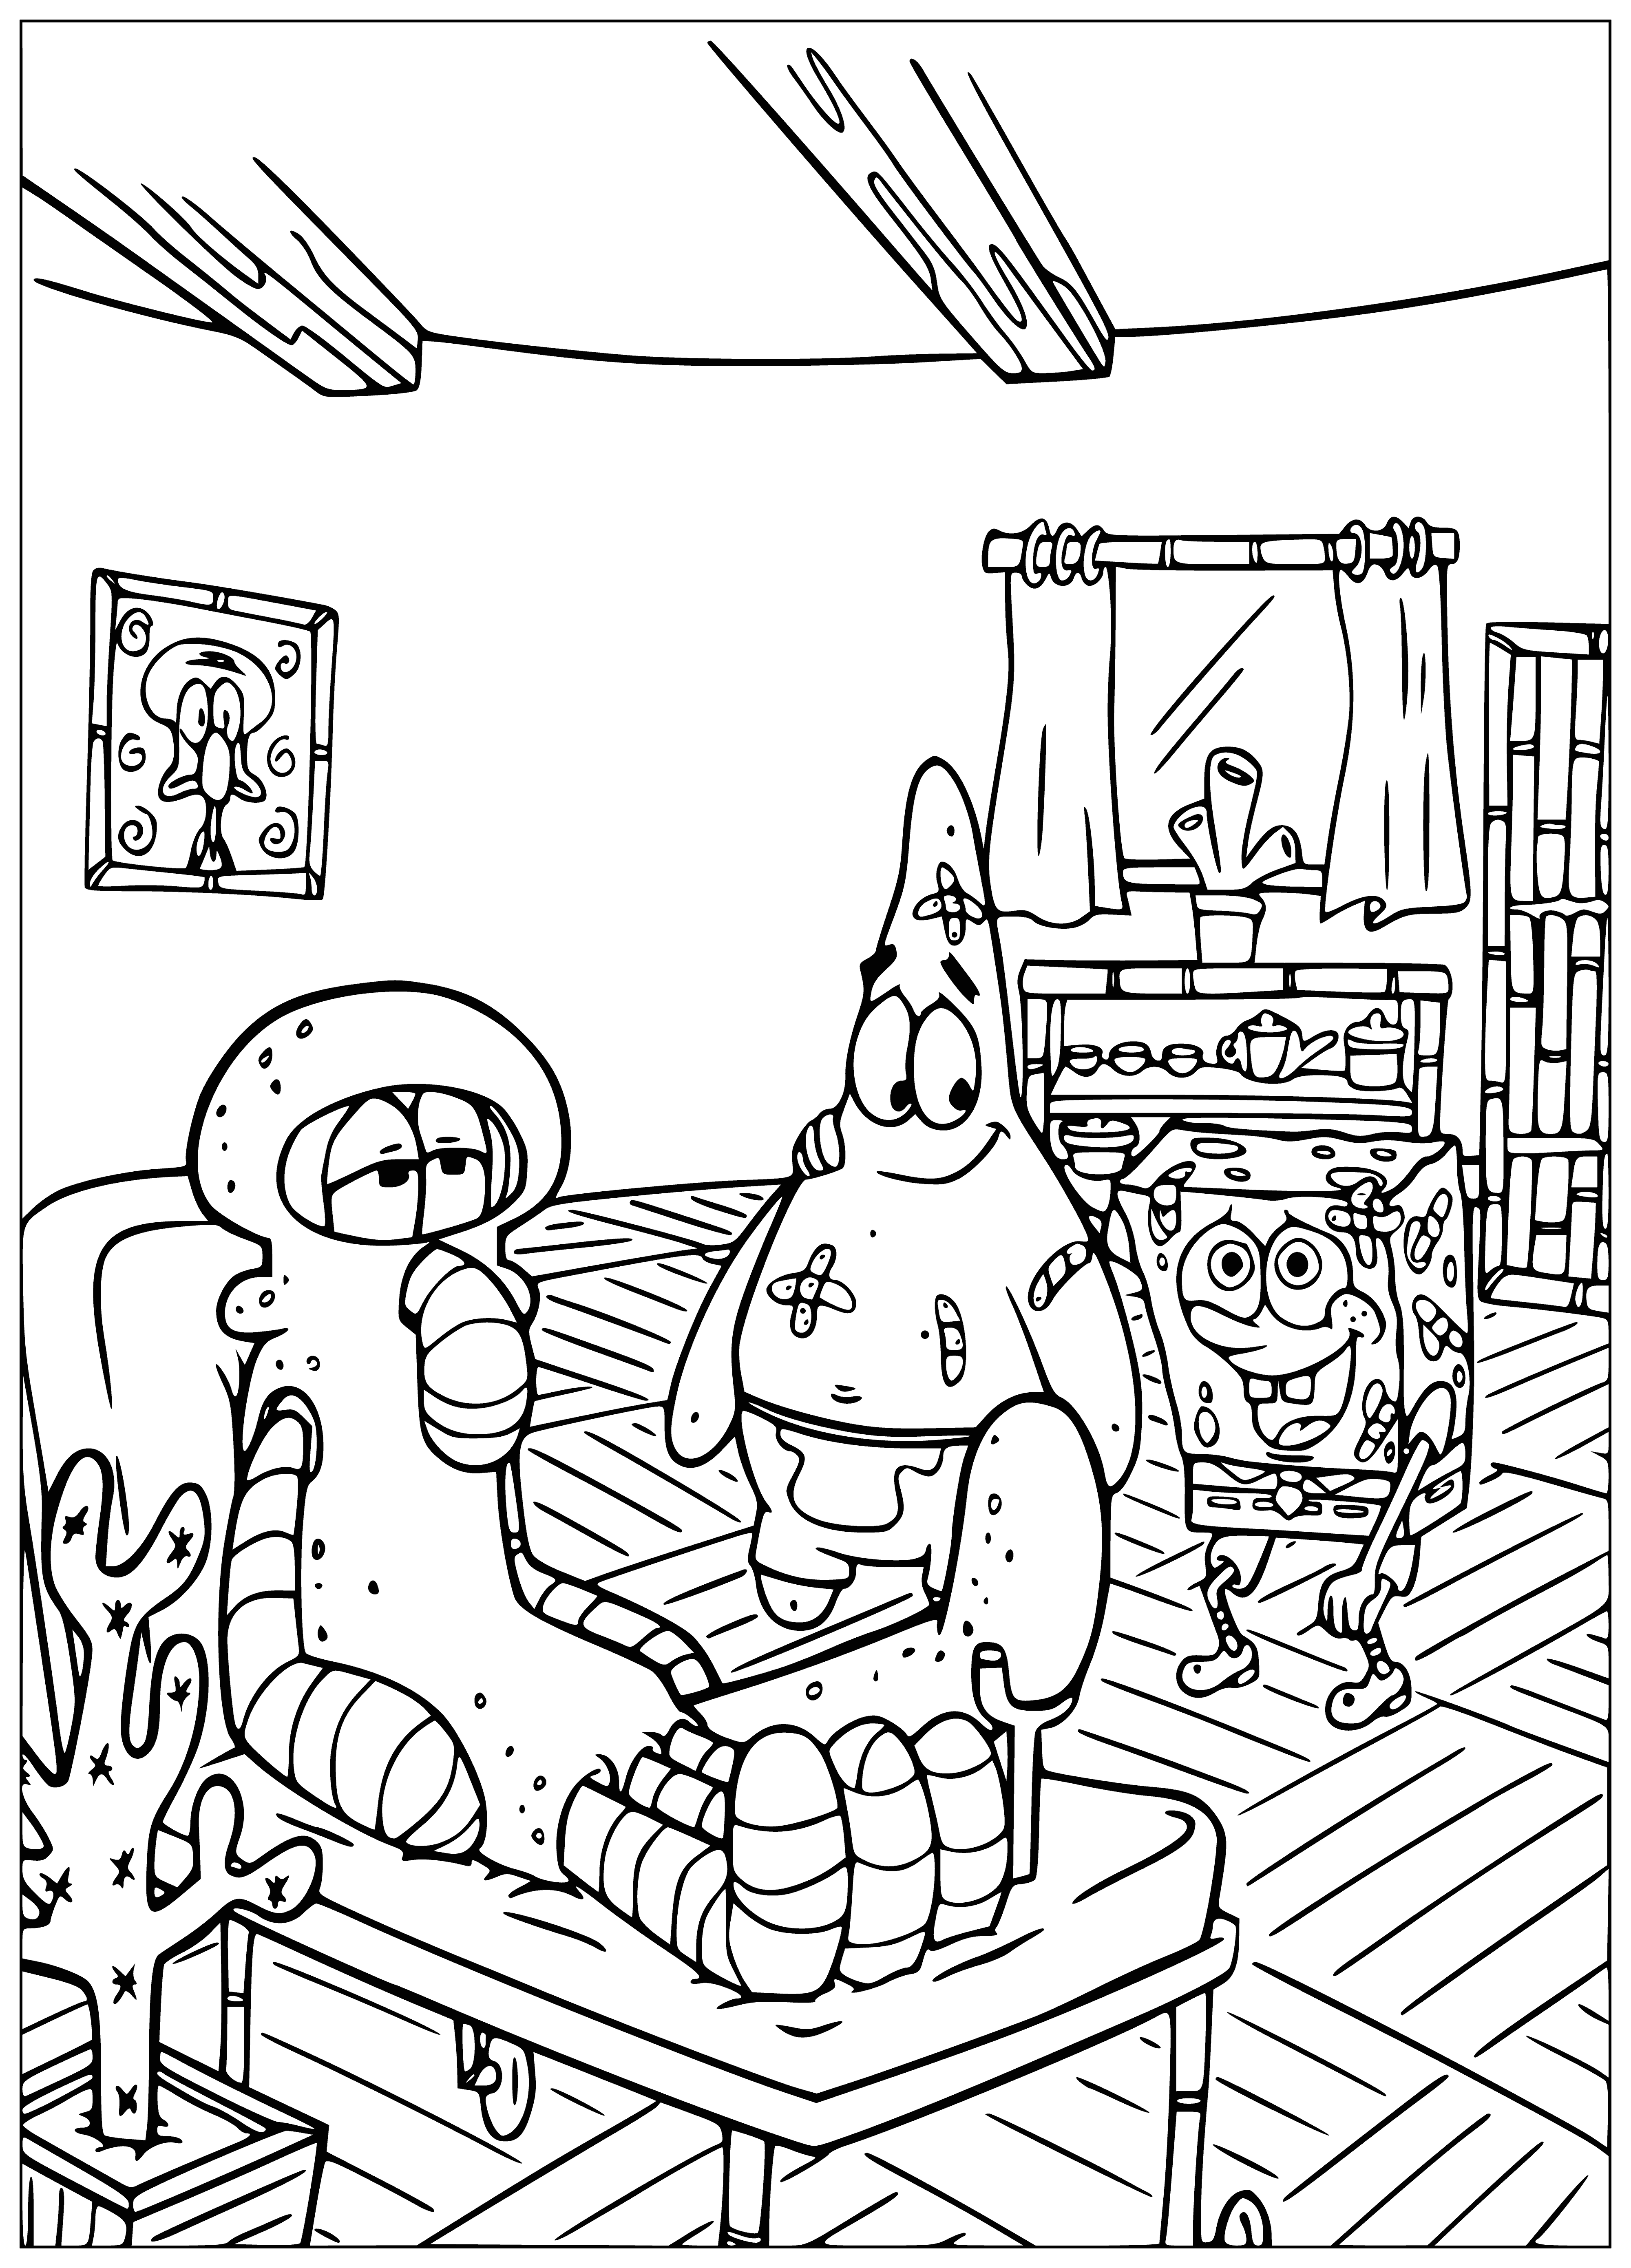 coloring page: SpongeBob is wearing a brown hat with a red flower, surrounded by blue flowers, with a big smile on his face.